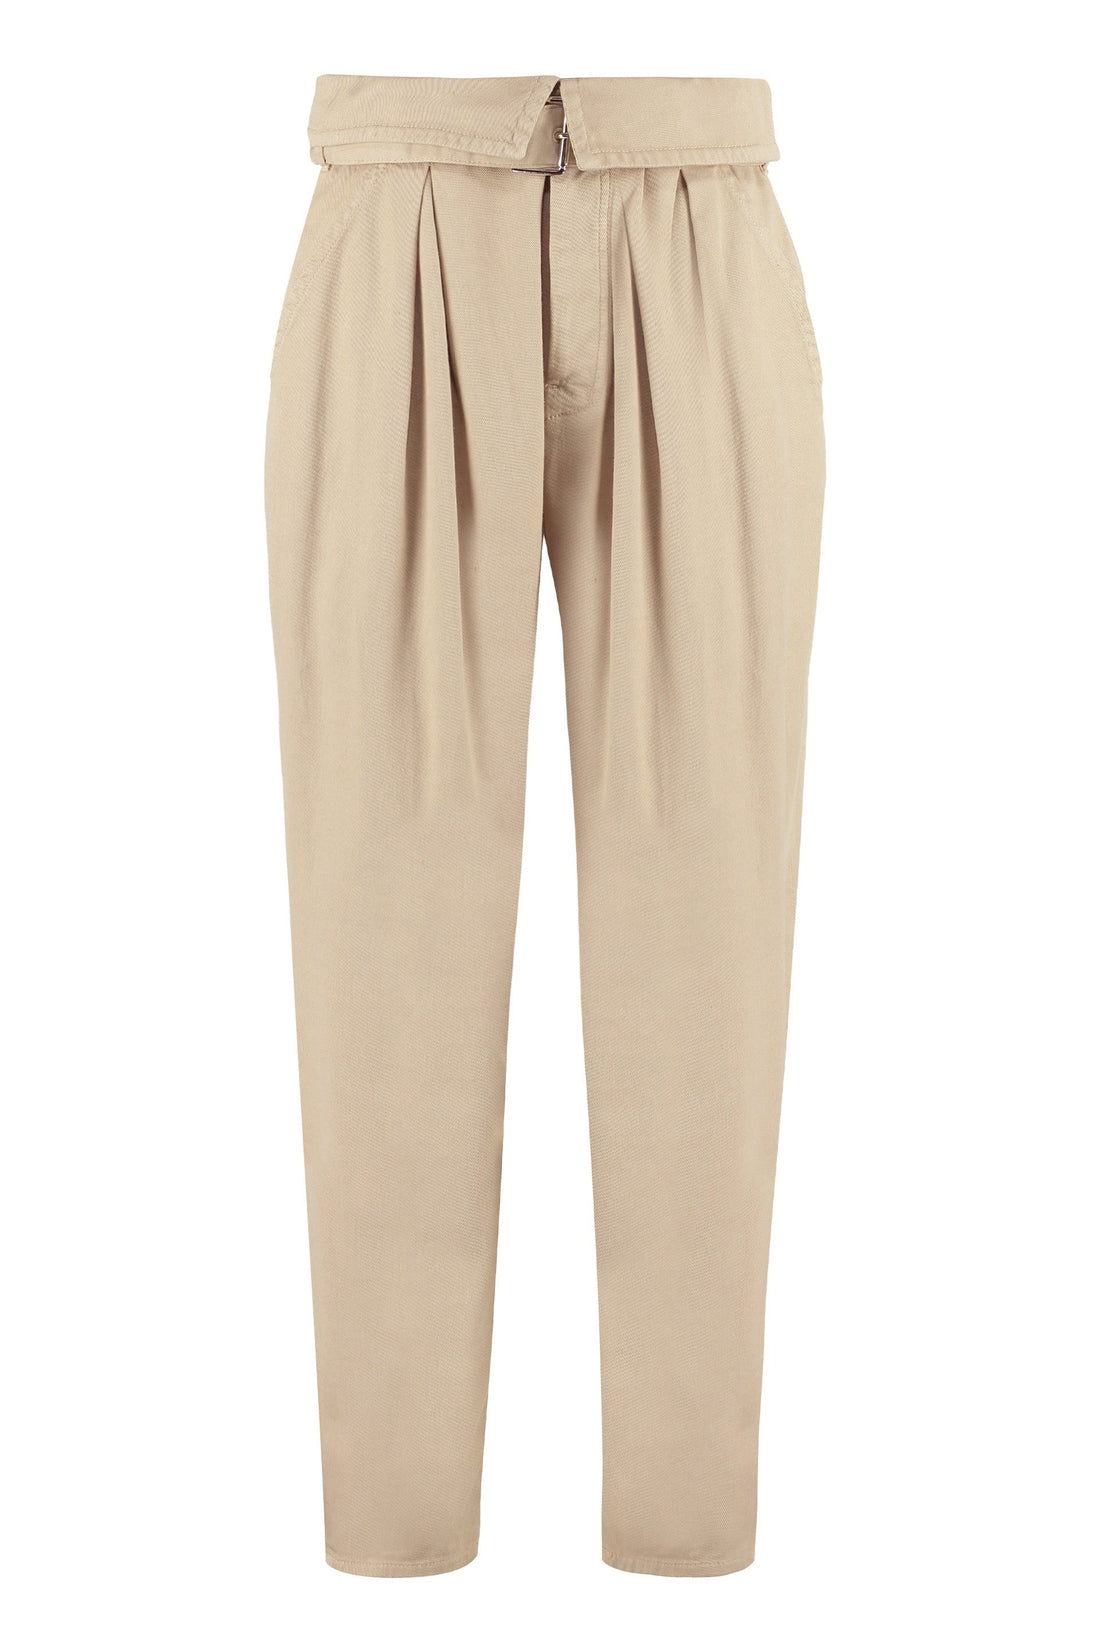 Pinko-OUTLET-SALE-Ingaggio high-rise cotton trousers-ARCHIVIST